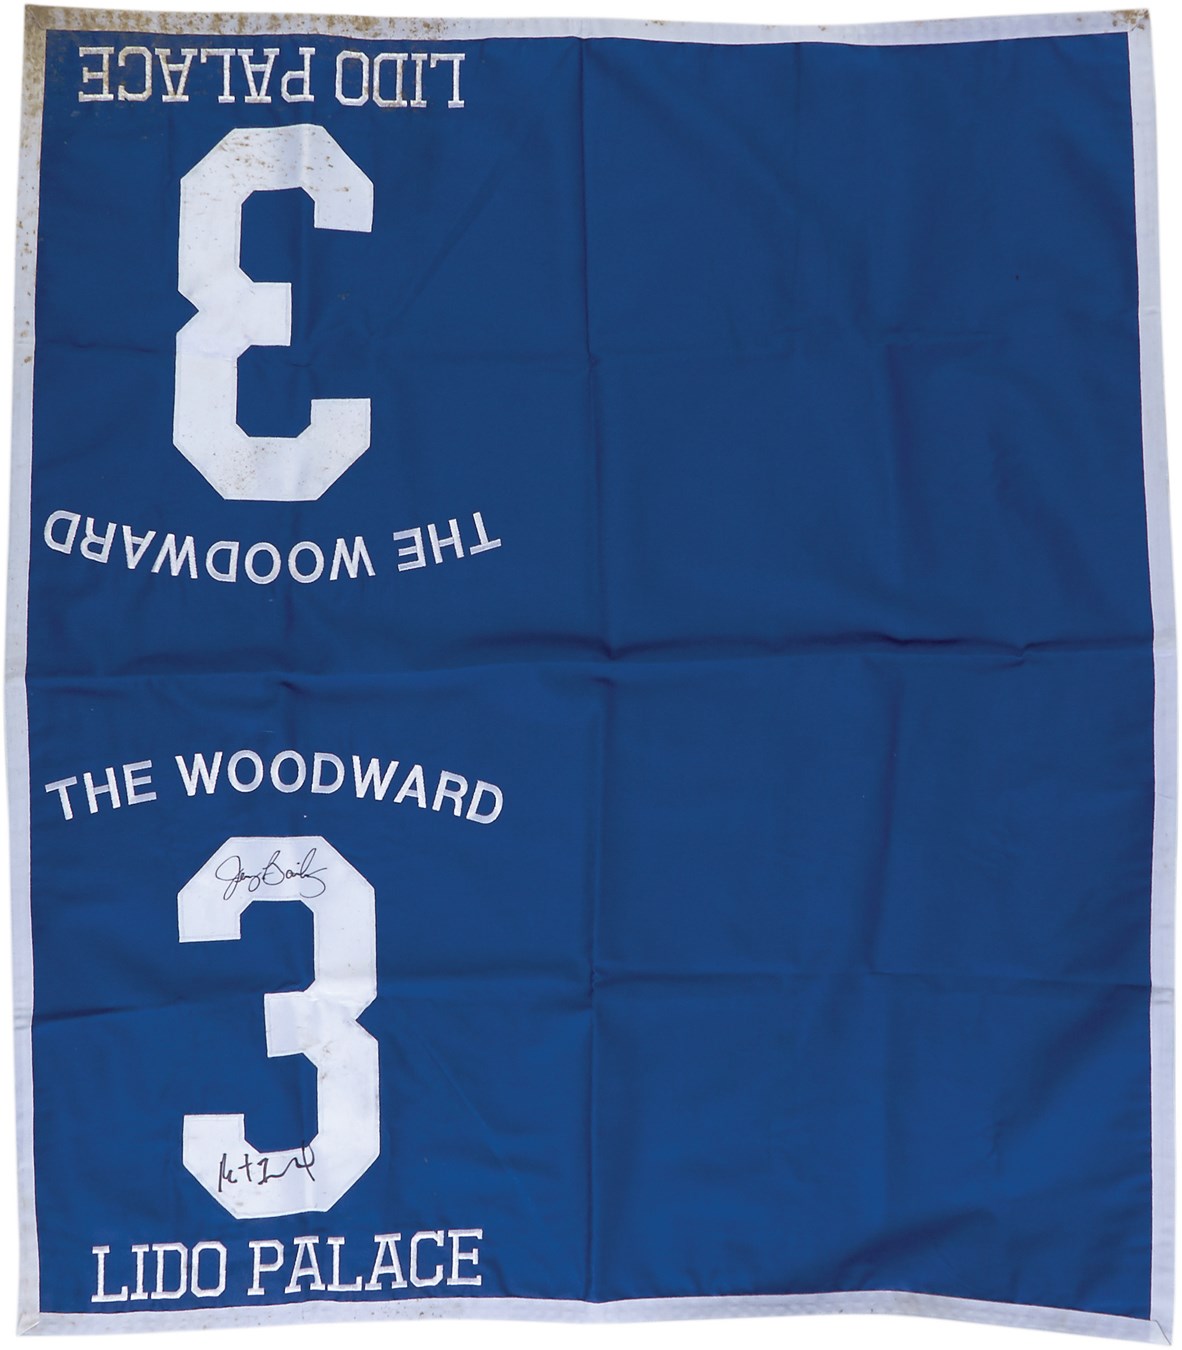 The Gotham Collection of Spectacular Horse Racing - 2001 Woodward Stakes Saddlecloth